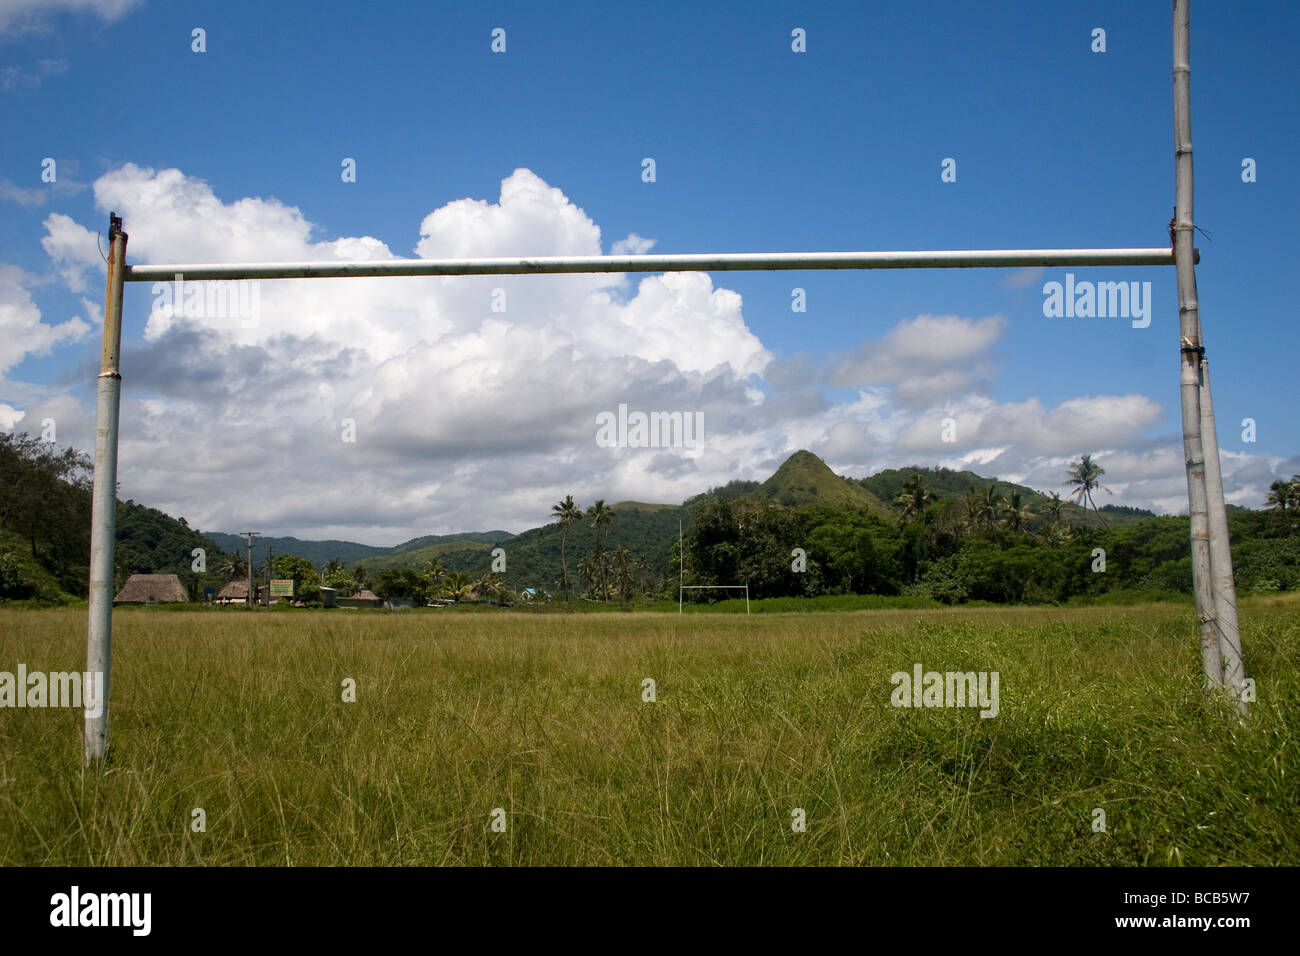 a Broken makeshift rugby post is visible in the Fijian landscape with overgrown grass on a rugby field Stock Photo